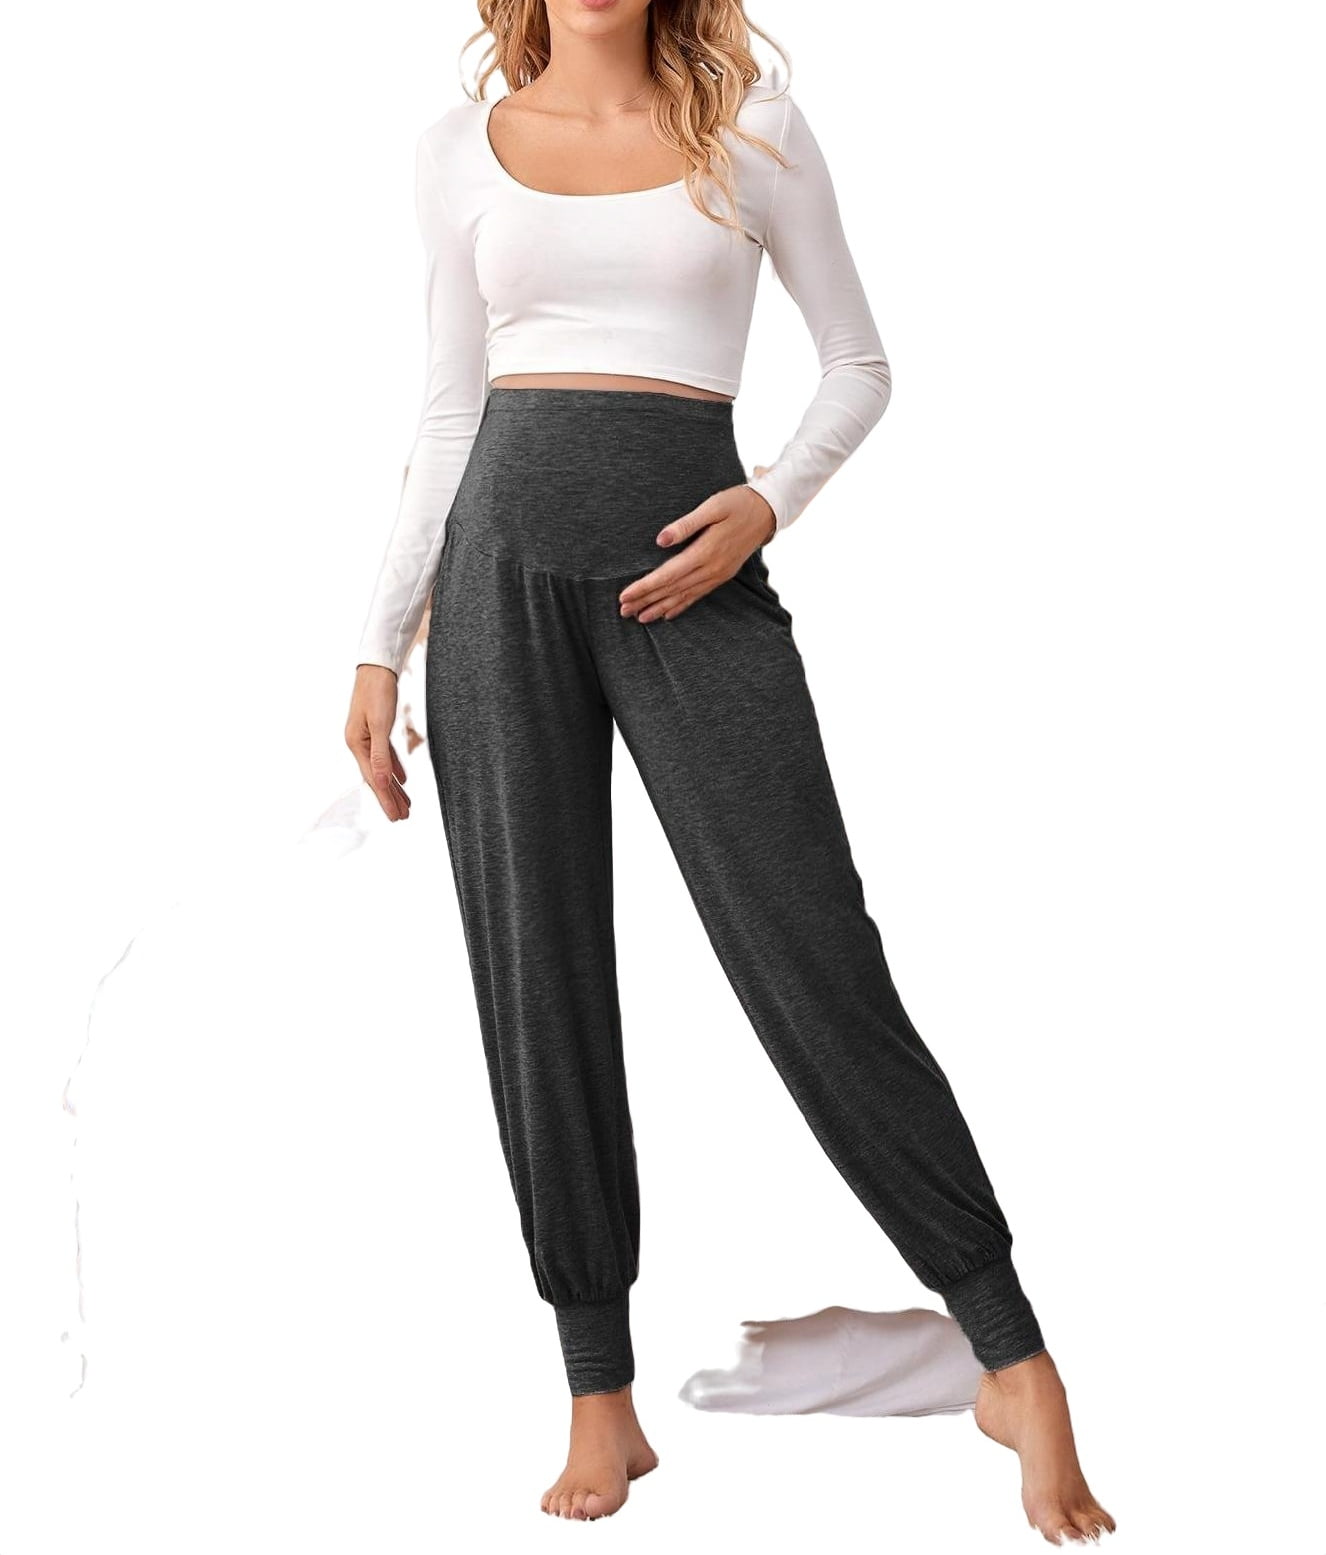 HDE Yoga Dress Pants for Women Straight Leg Pull On Pants with 8 Pockets  Navy Blue - XL Short